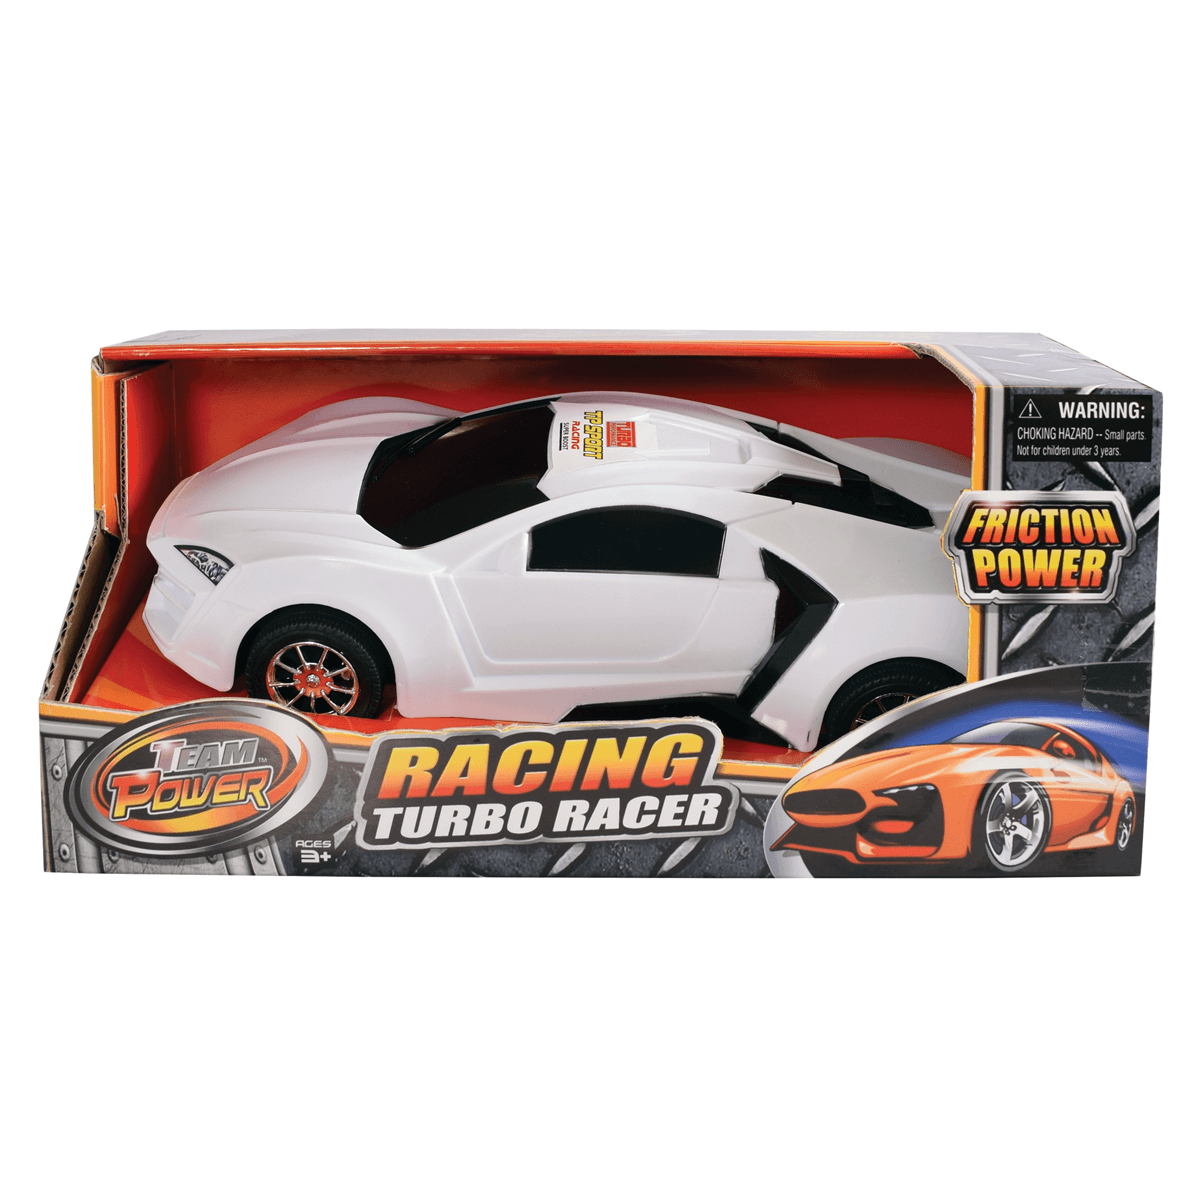 Friction Power 29cm Turbo Racer (Colors Vary)